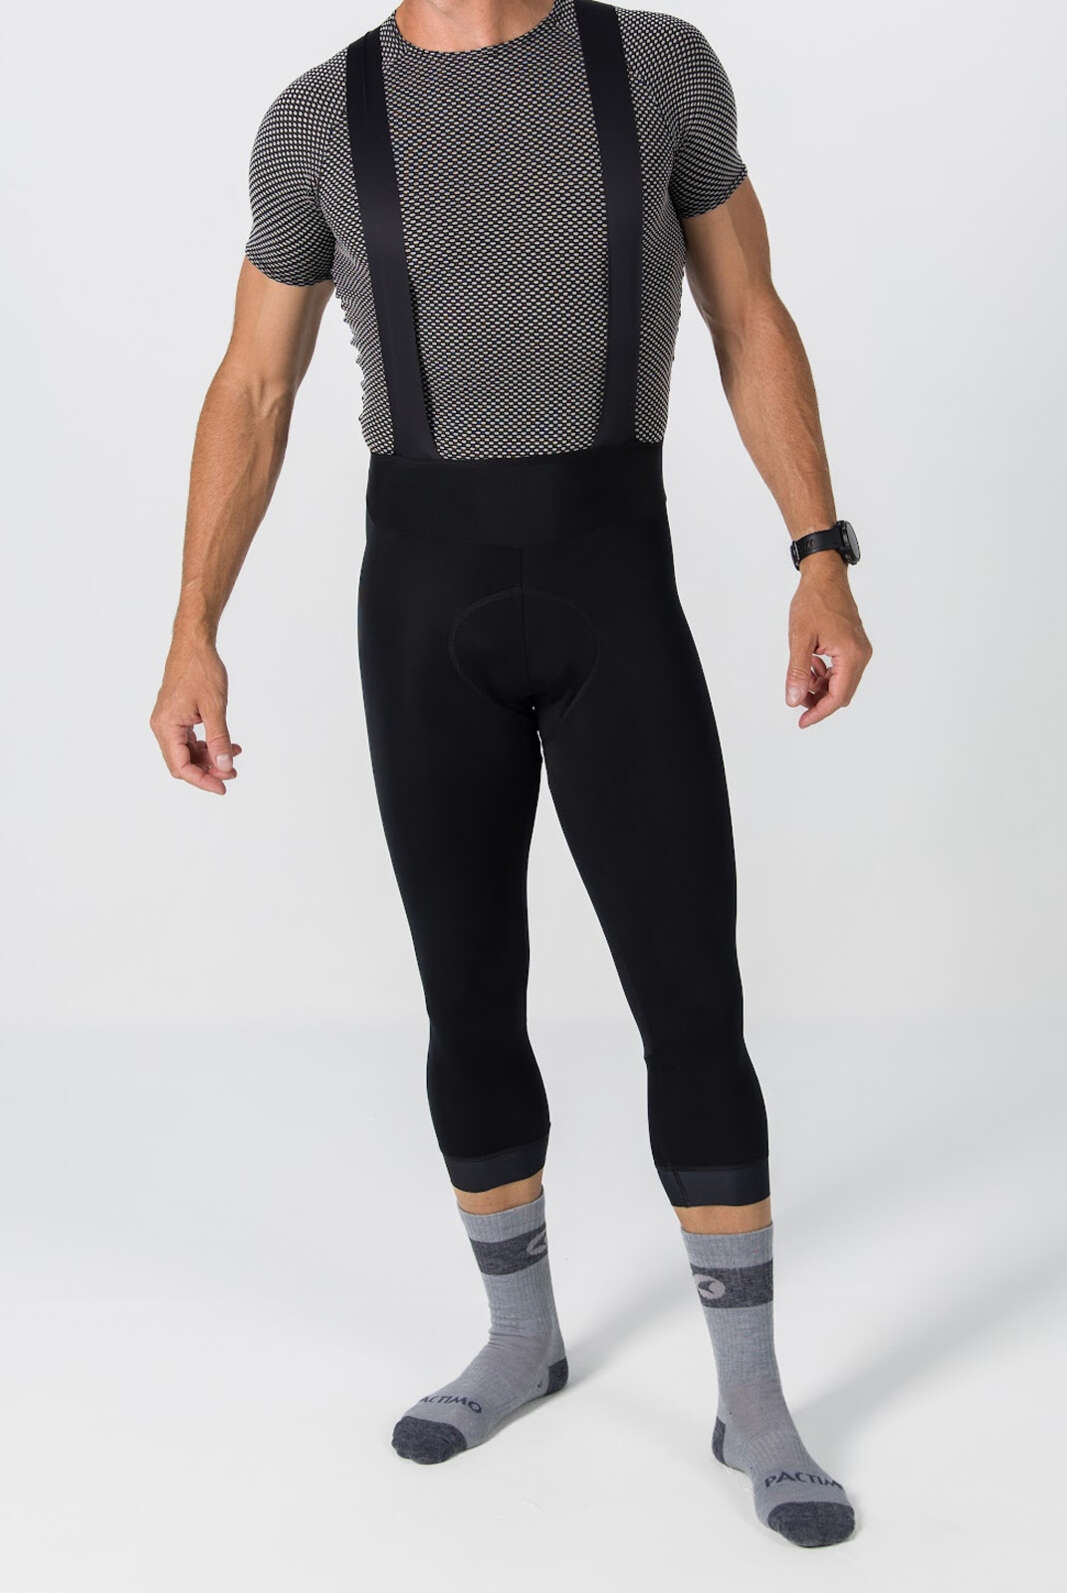 Men's Water-Repelling 3/4 Thermal Cycling Bib Tights - Front View